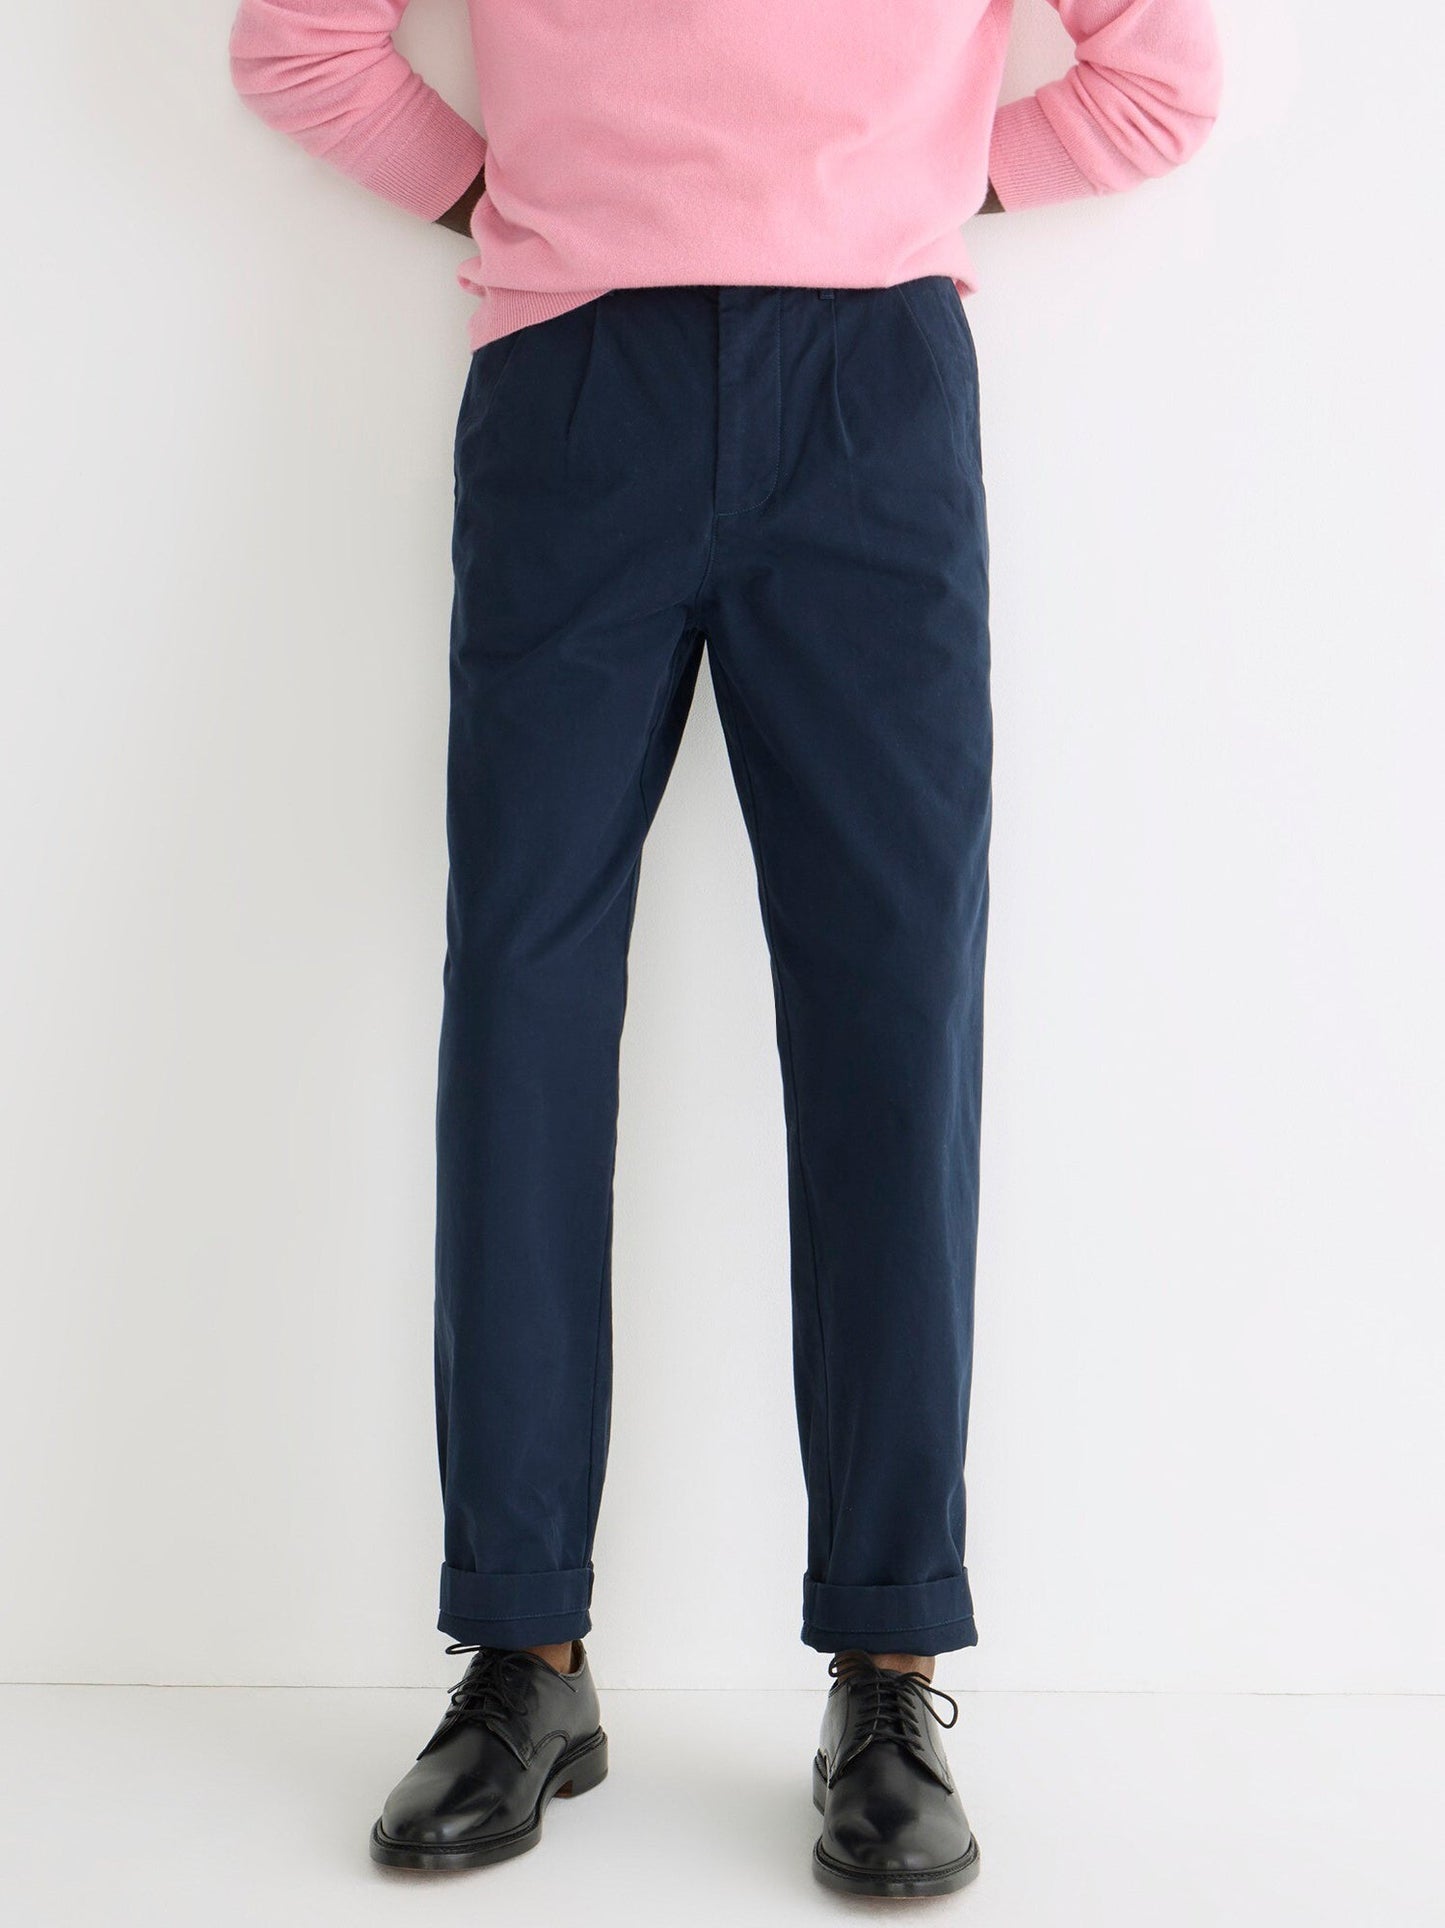 Classic double-pleated chino pant